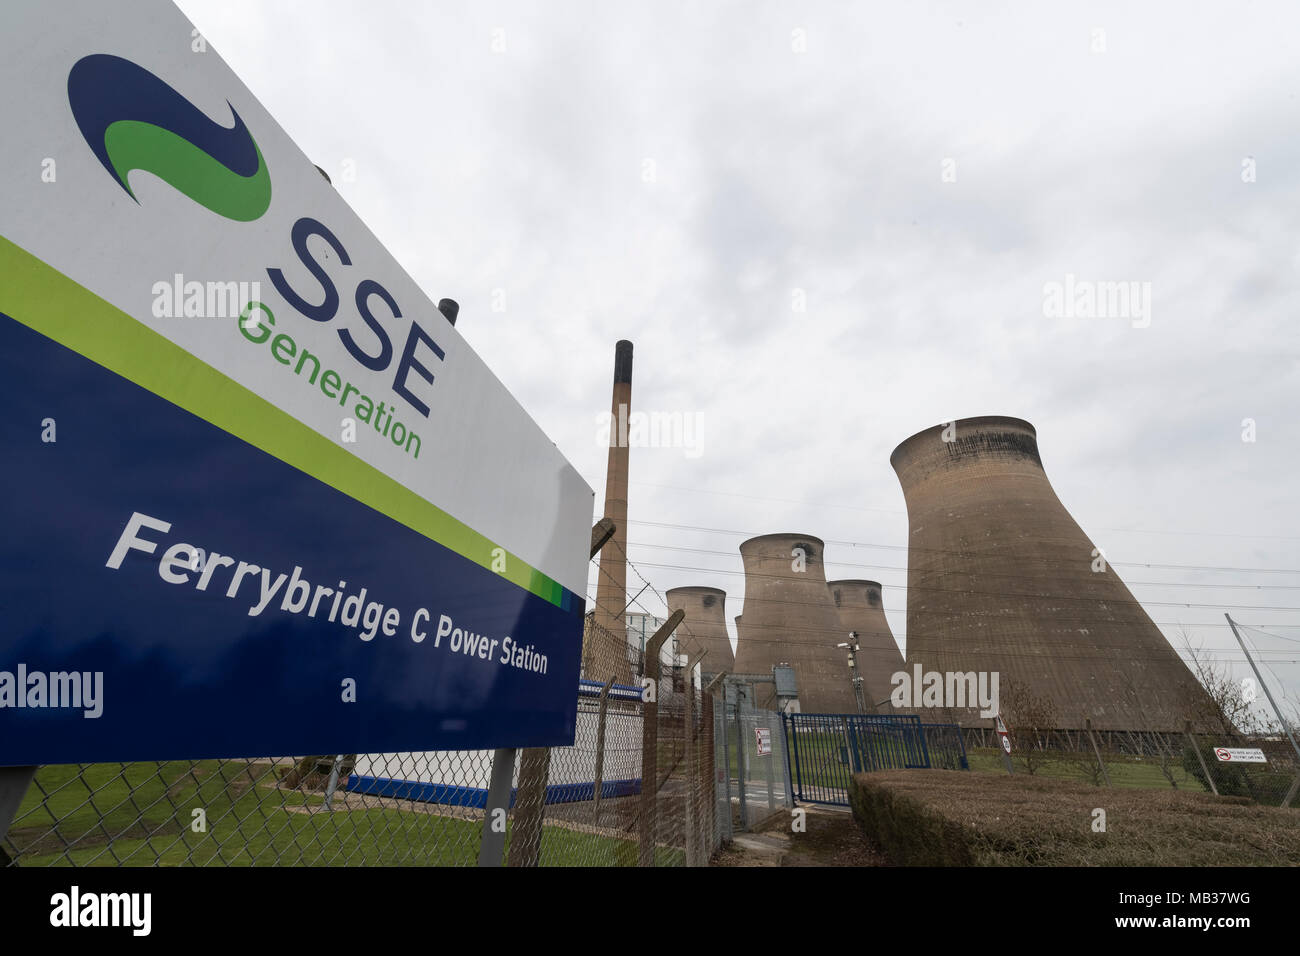 General view of Ferrybridge C Power Station, which has been decommissioned. Ferrybridge, Yorkshire, UK. 6th April 2018. Stock Photo